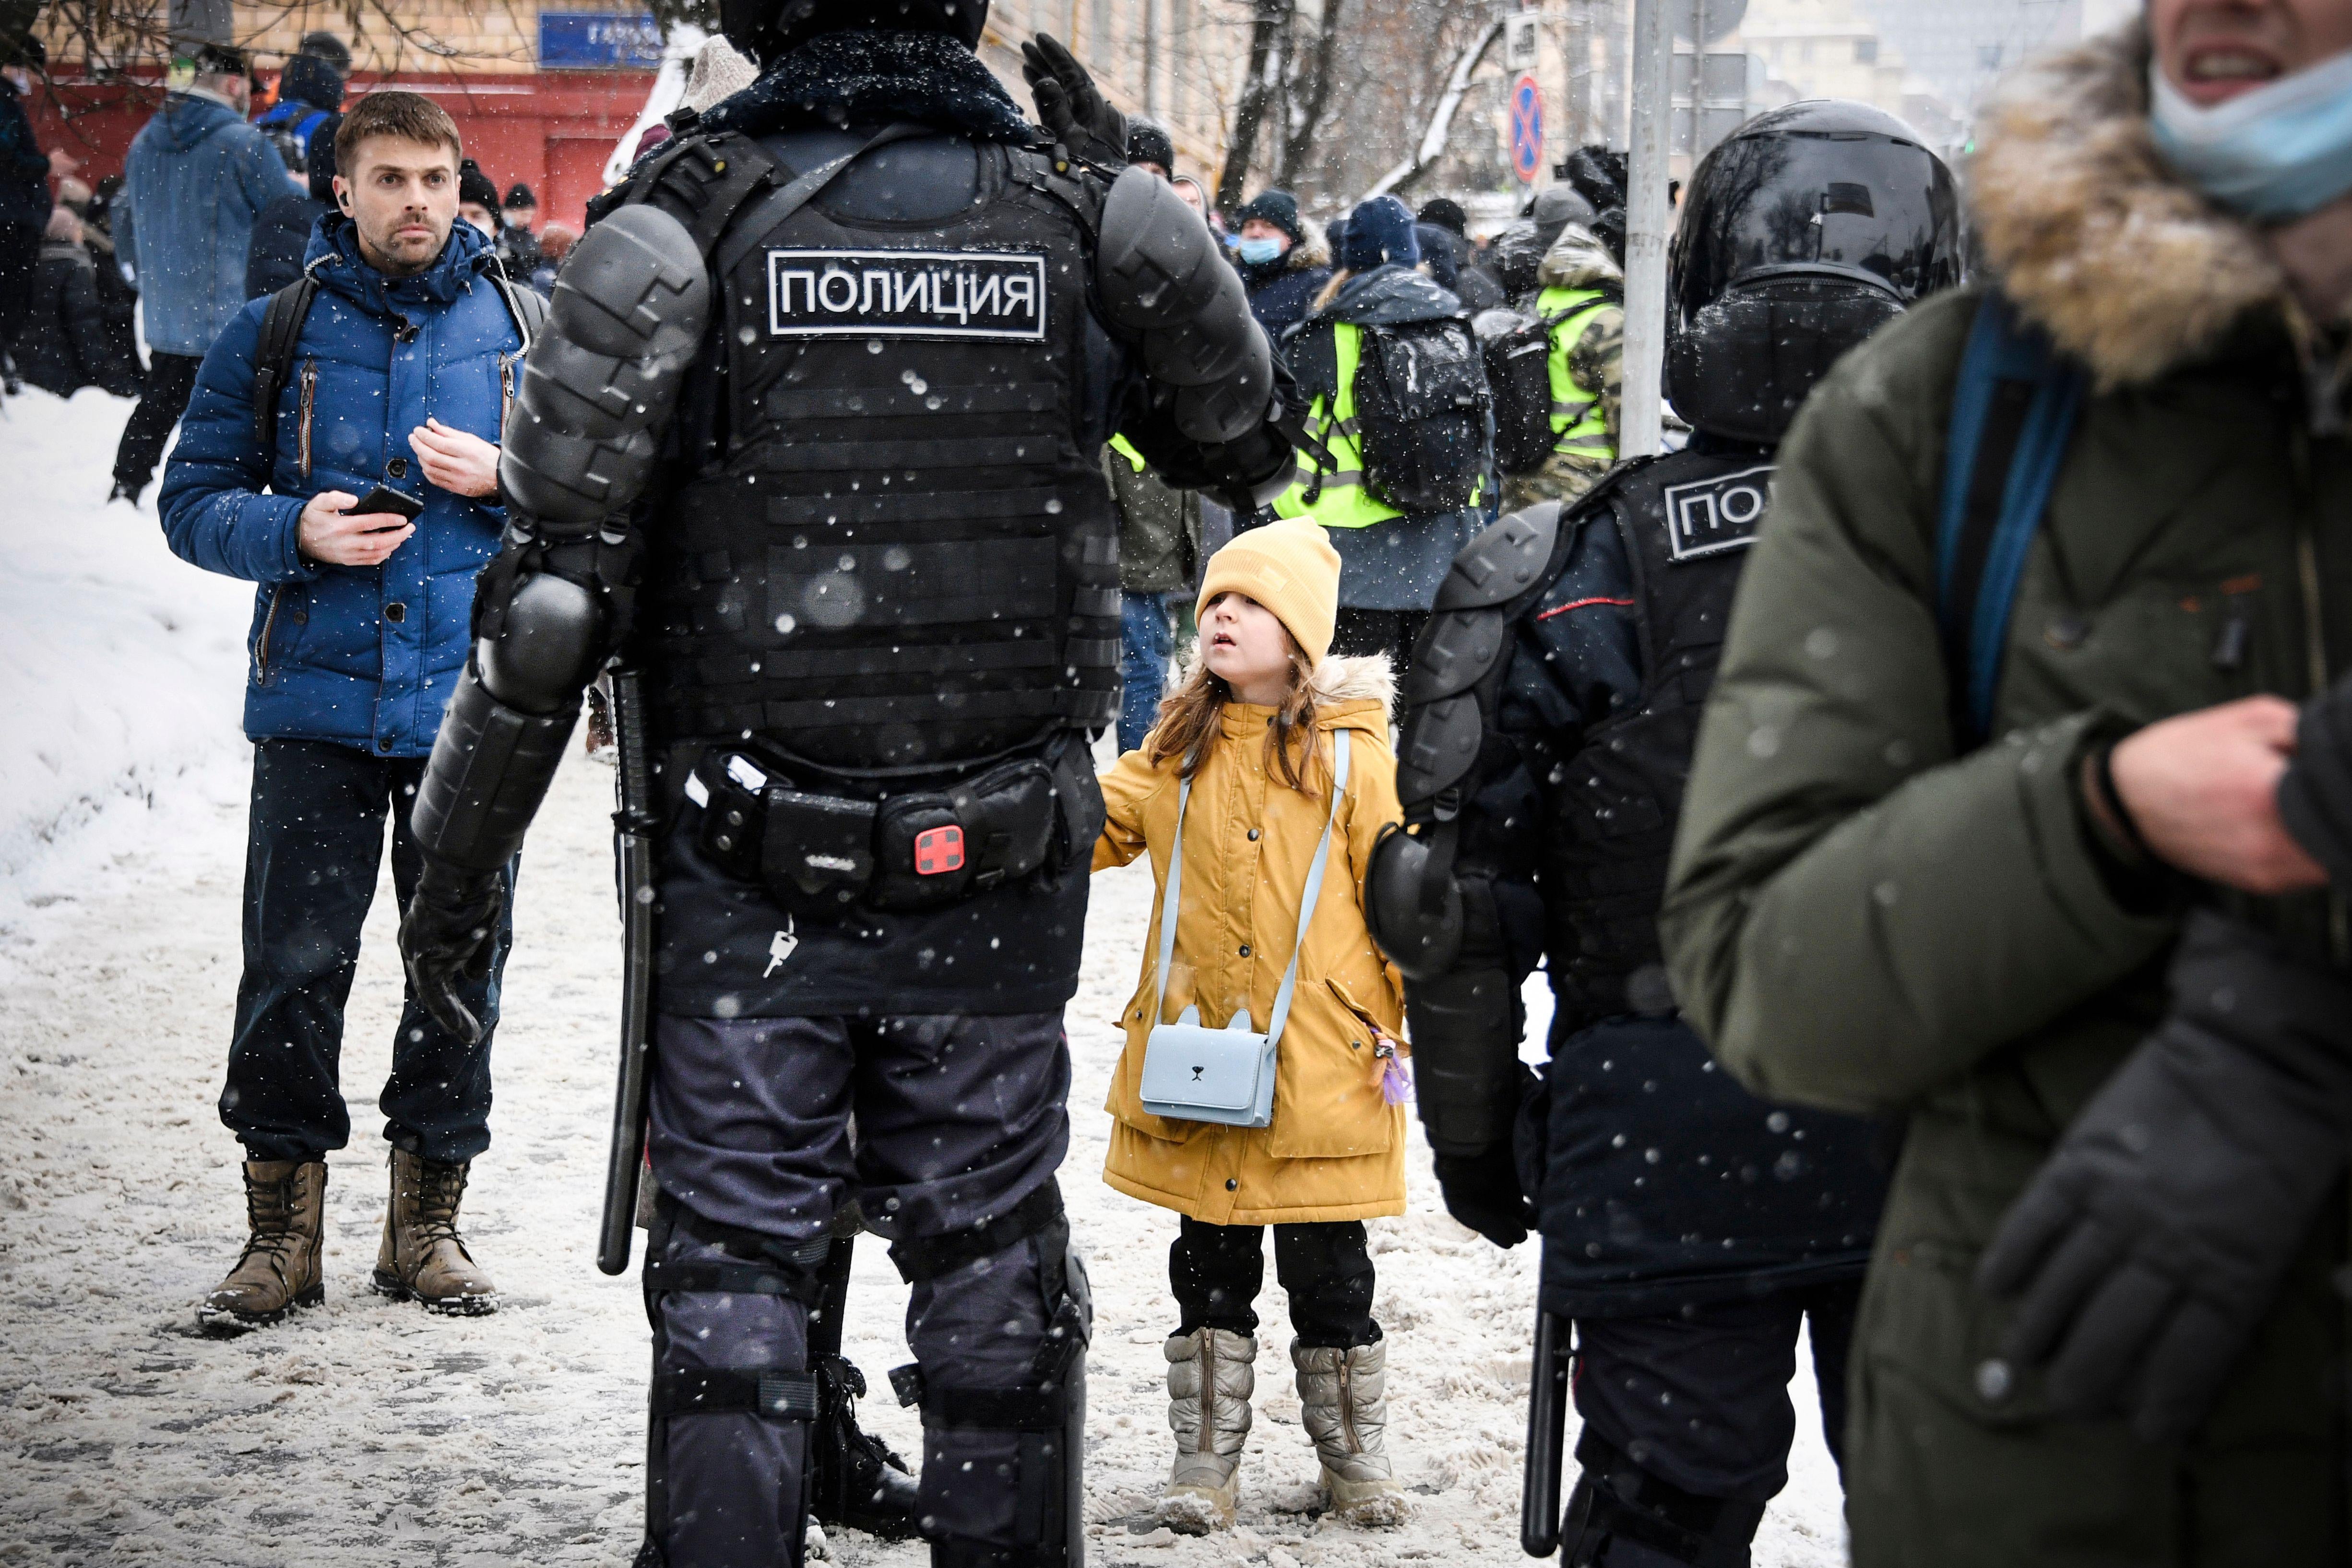 People talk to riot police during a rally in support of jailed opposition leader Alexei Navalny in Moscow on January 31, 2021.